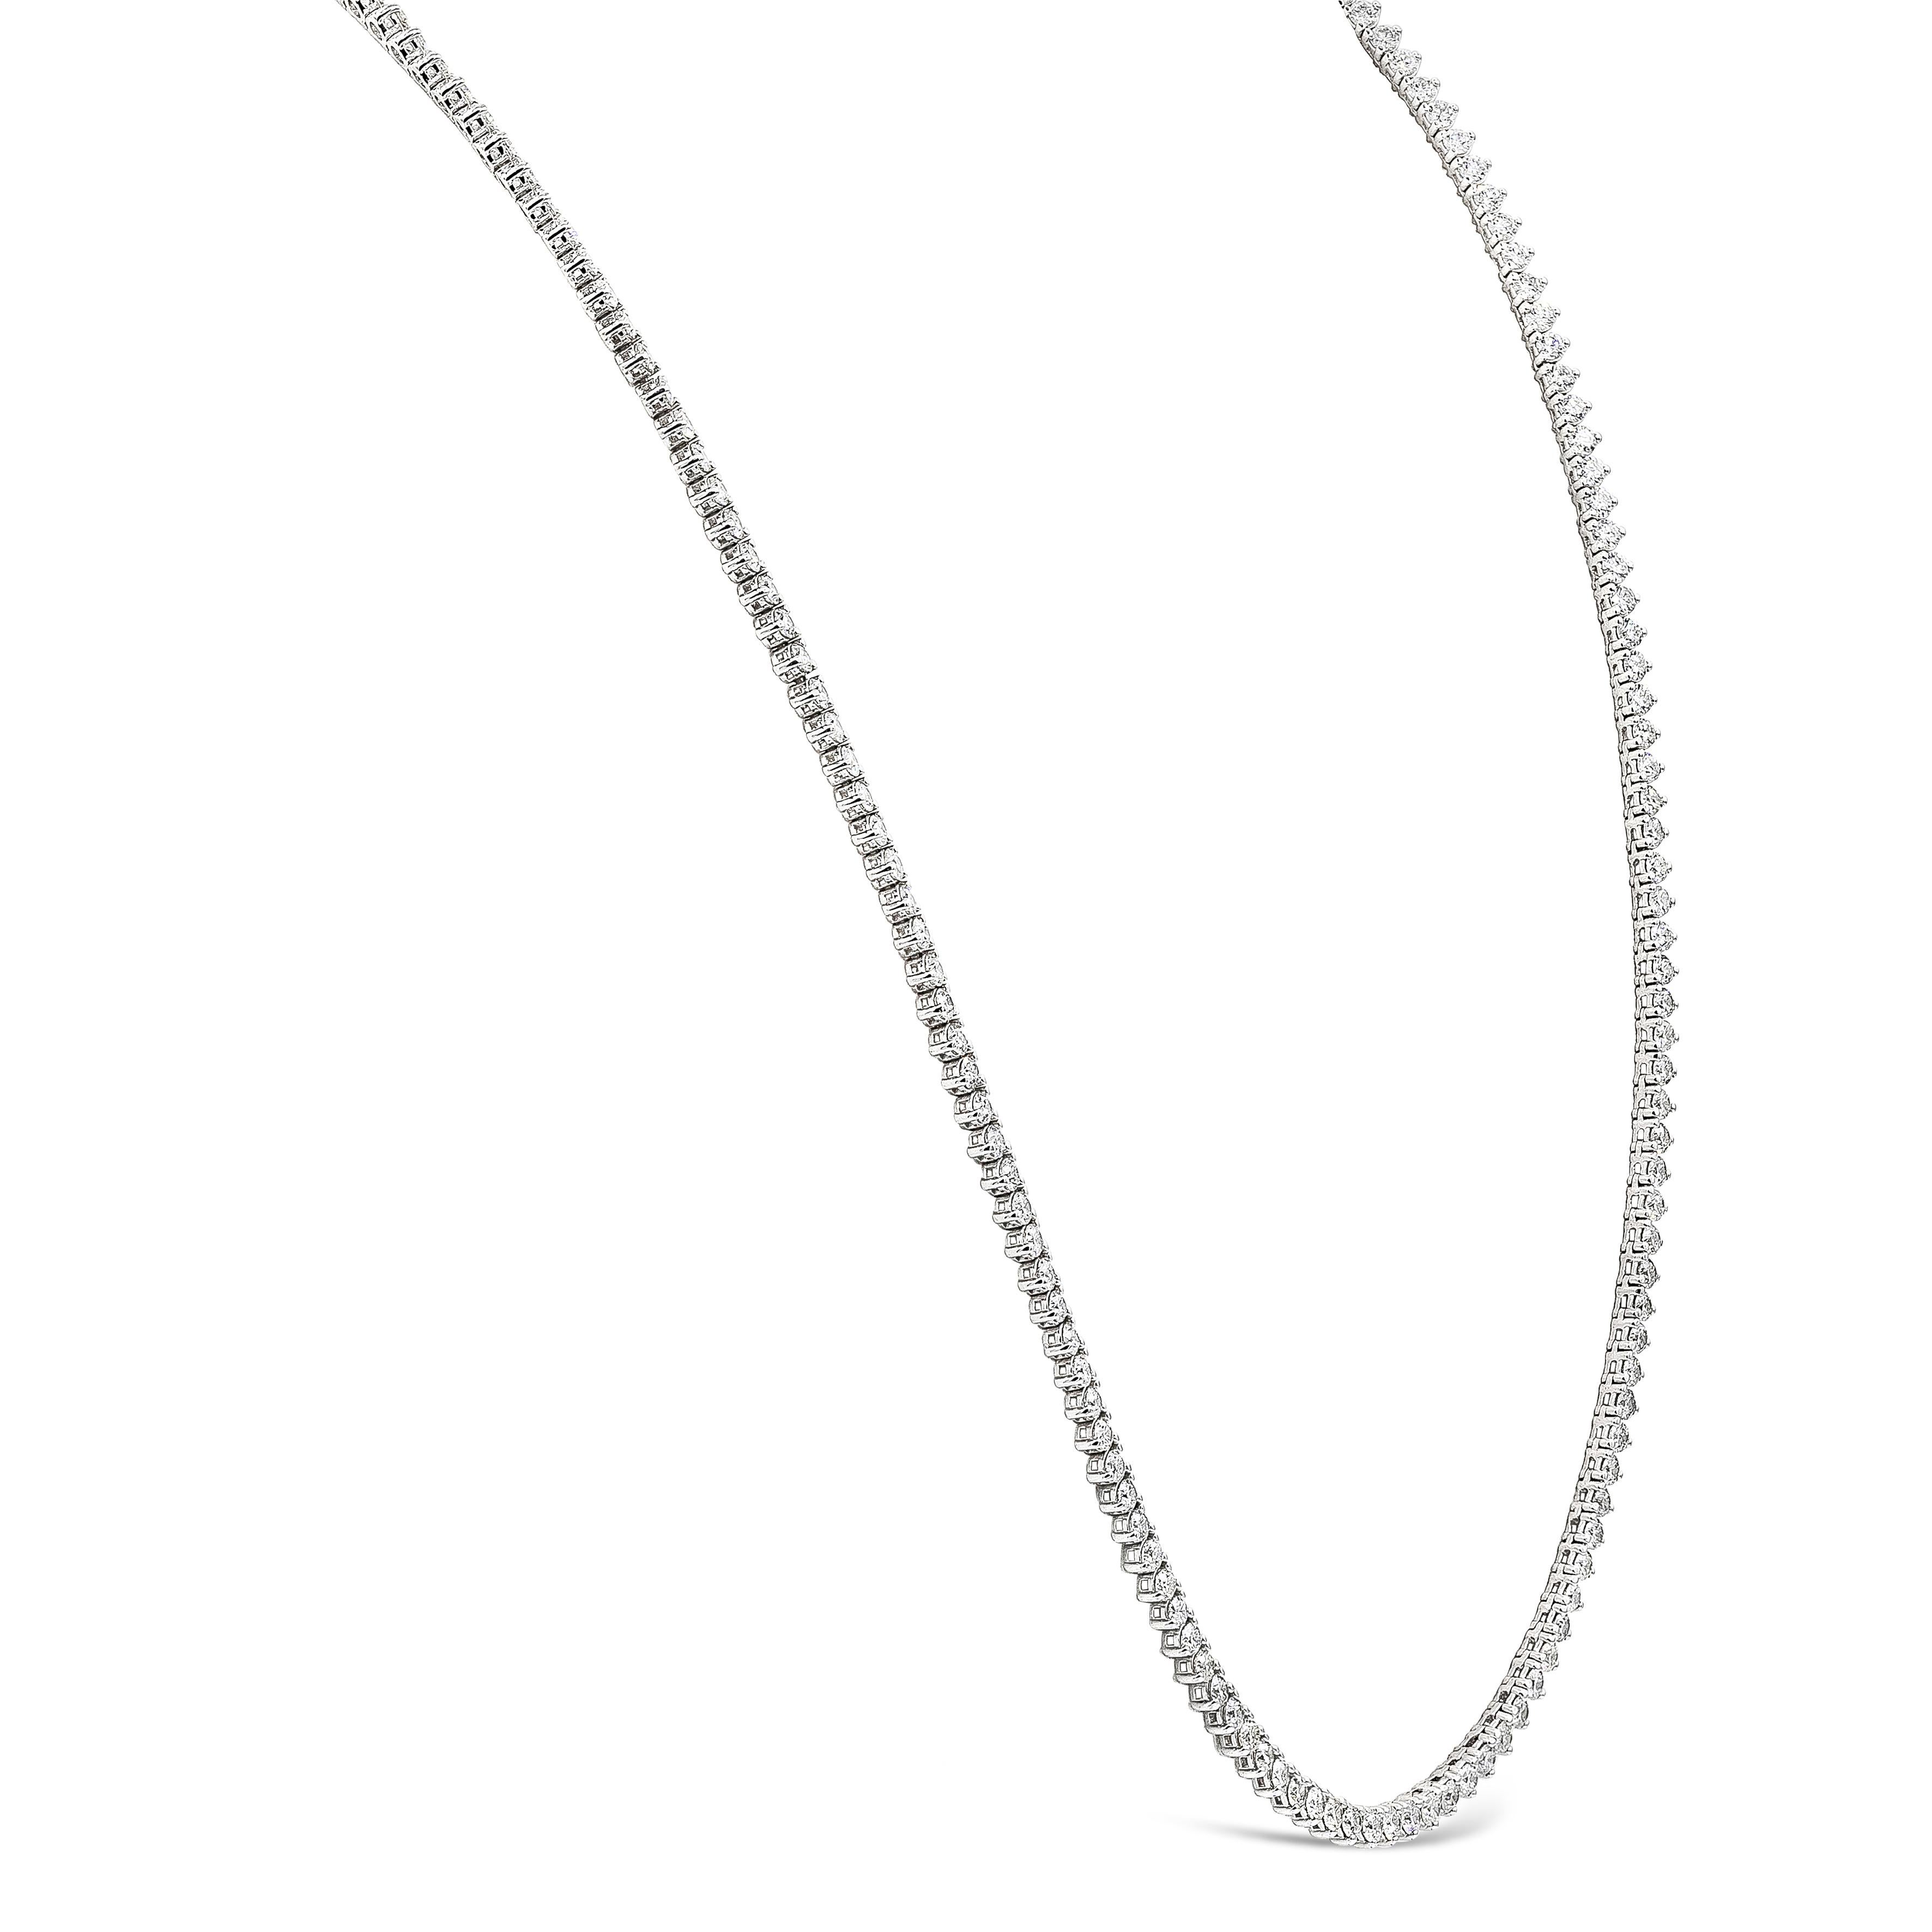 A brilliant necklace showcasing a row of round brilliant diamonds spaced evenly in a polished 18K white gold mounting. Diamonds weigh 29.00 carats total and are approximately F color, SI in clarity. Finely made in 18K white gold and 36.13 inches in